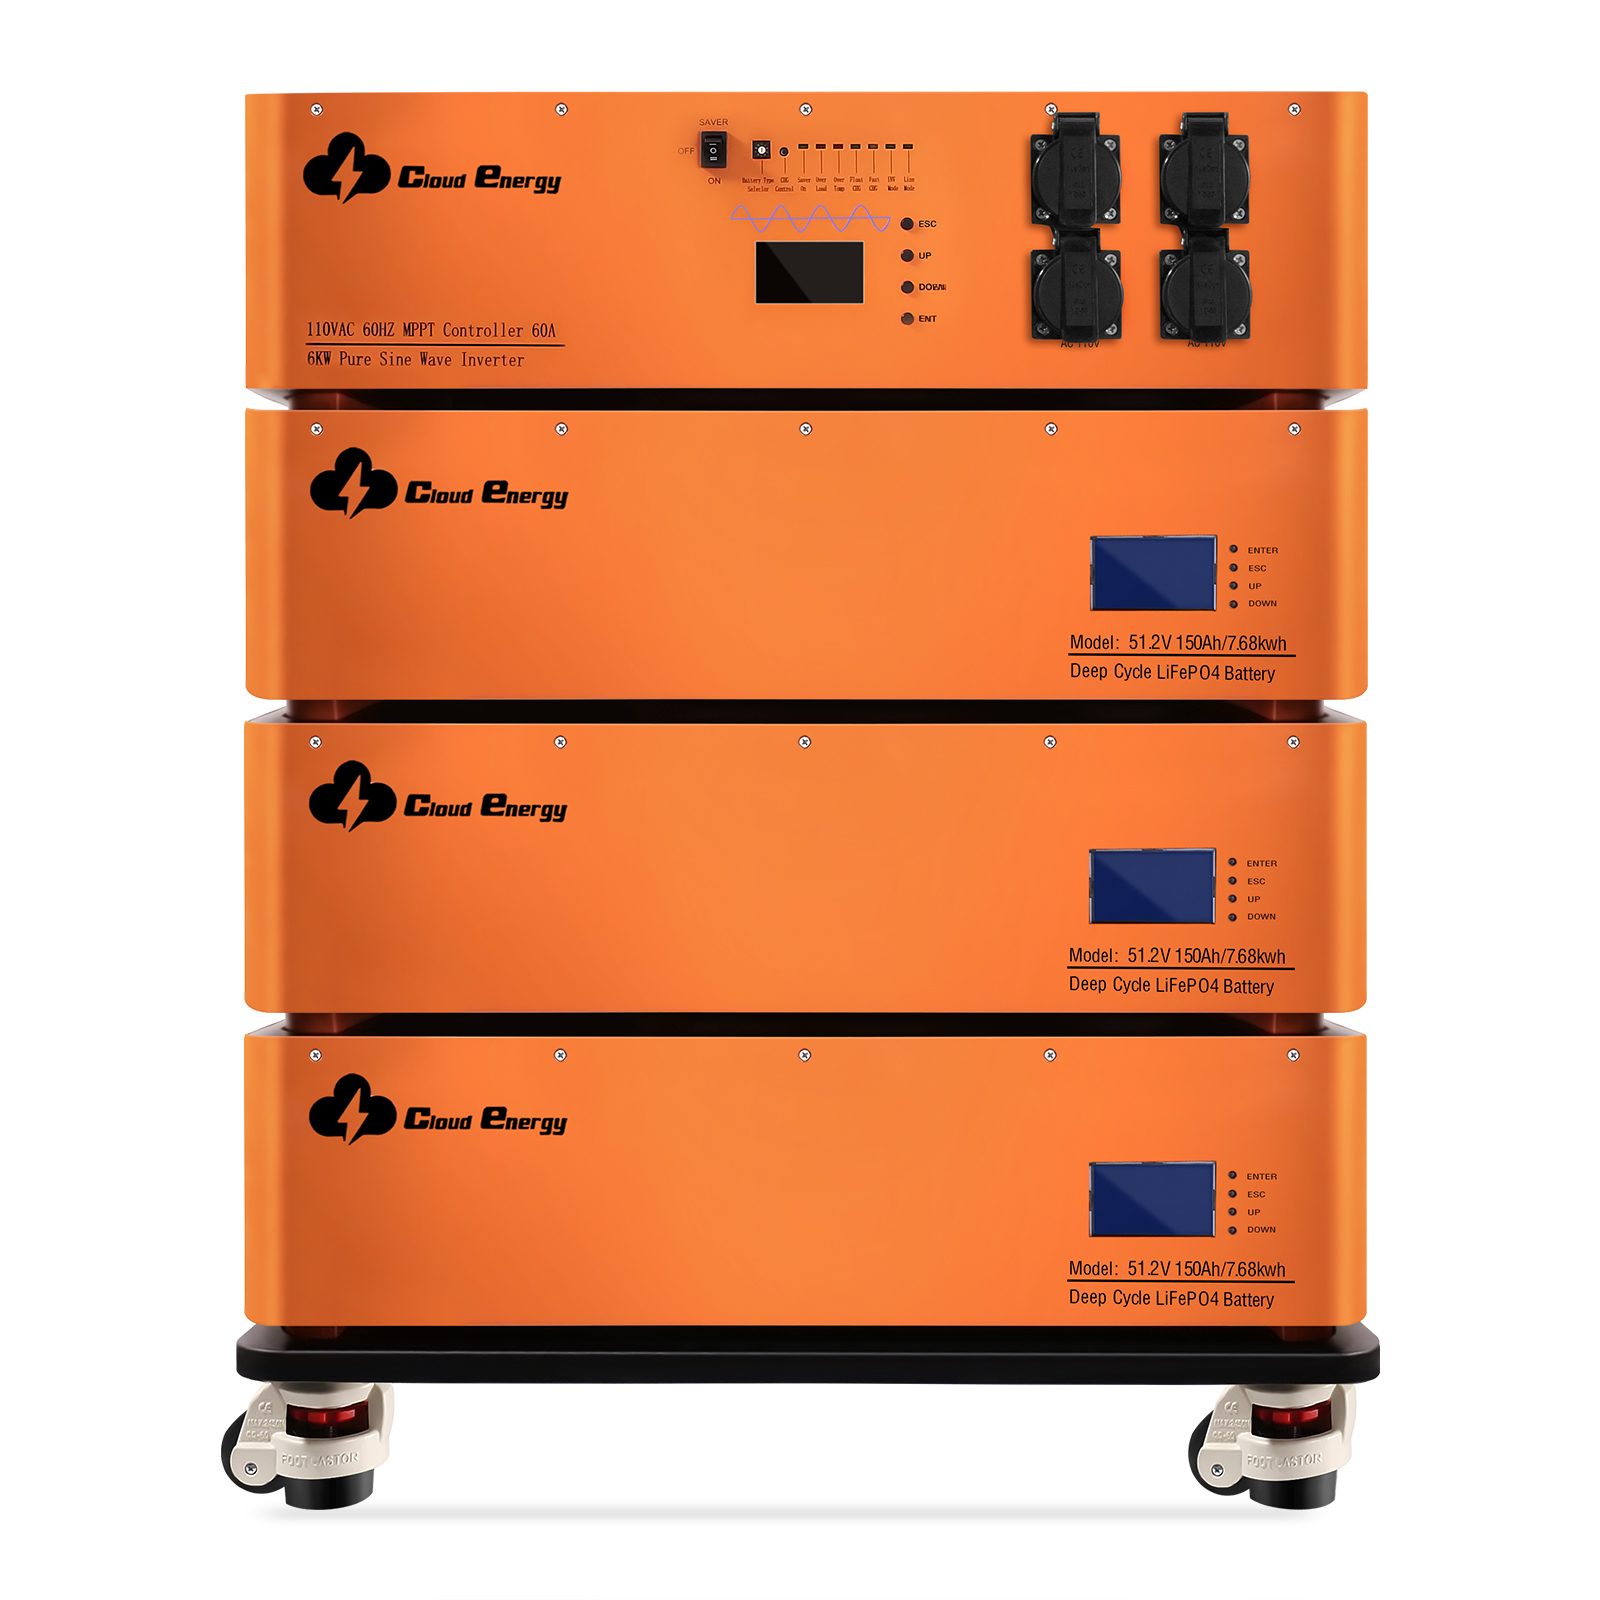 Cloud Energy 24v 150ah lifepo4 battery pack lithium for solar storage  system forklifts fosfet camper rechargeableable